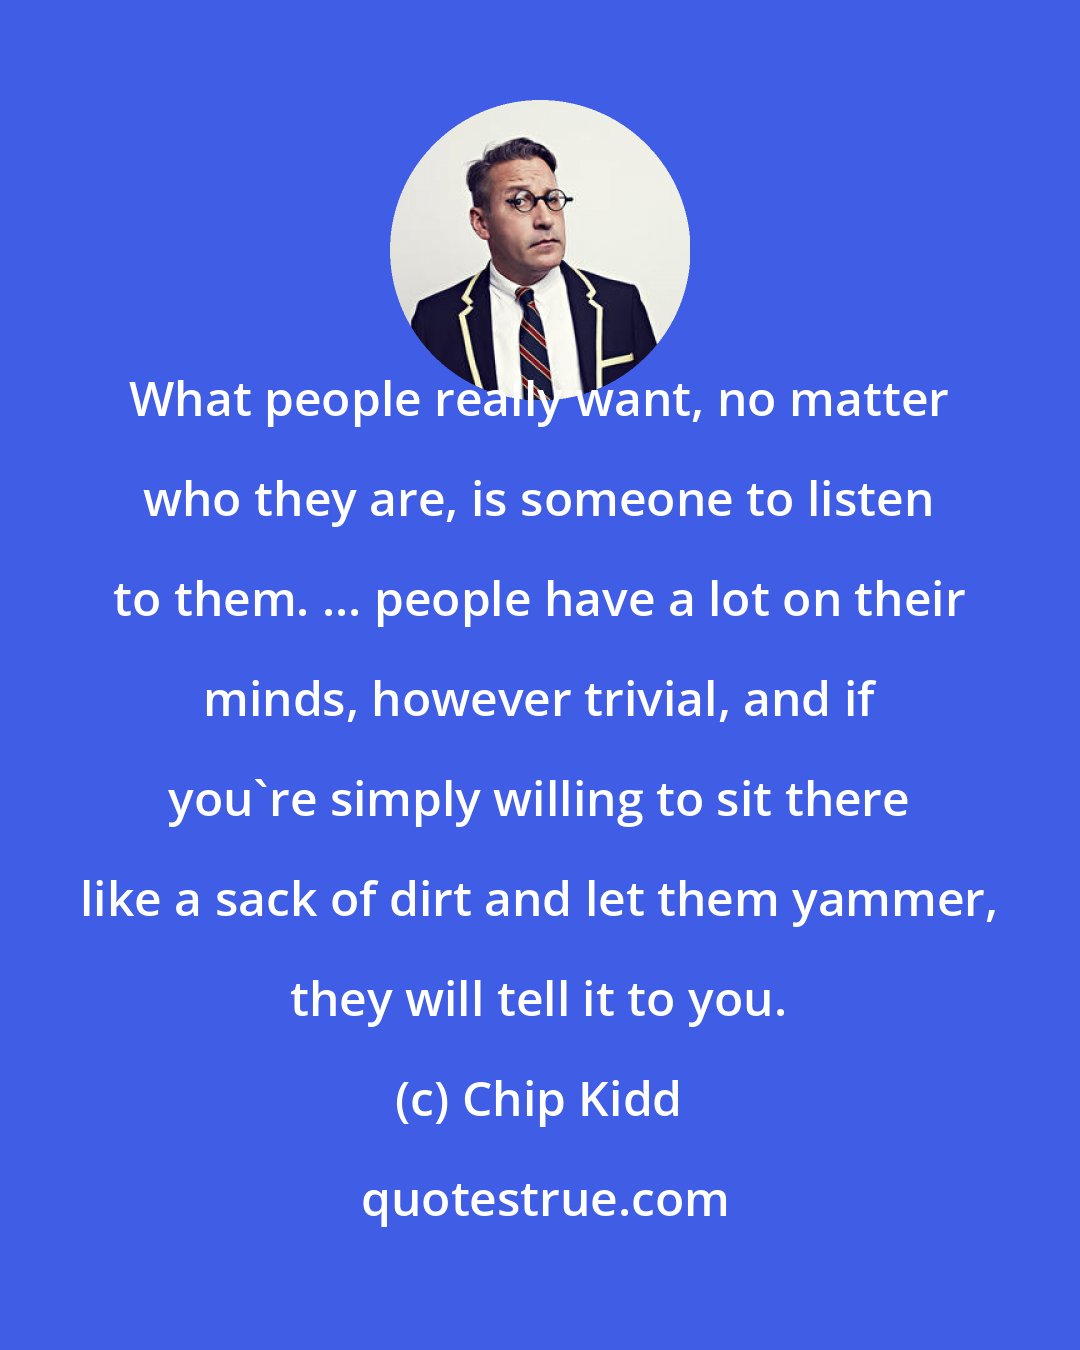 Chip Kidd: What people really want, no matter who they are, is someone to listen to them. ... people have a lot on their minds, however trivial, and if you're simply willing to sit there like a sack of dirt and let them yammer, they will tell it to you.